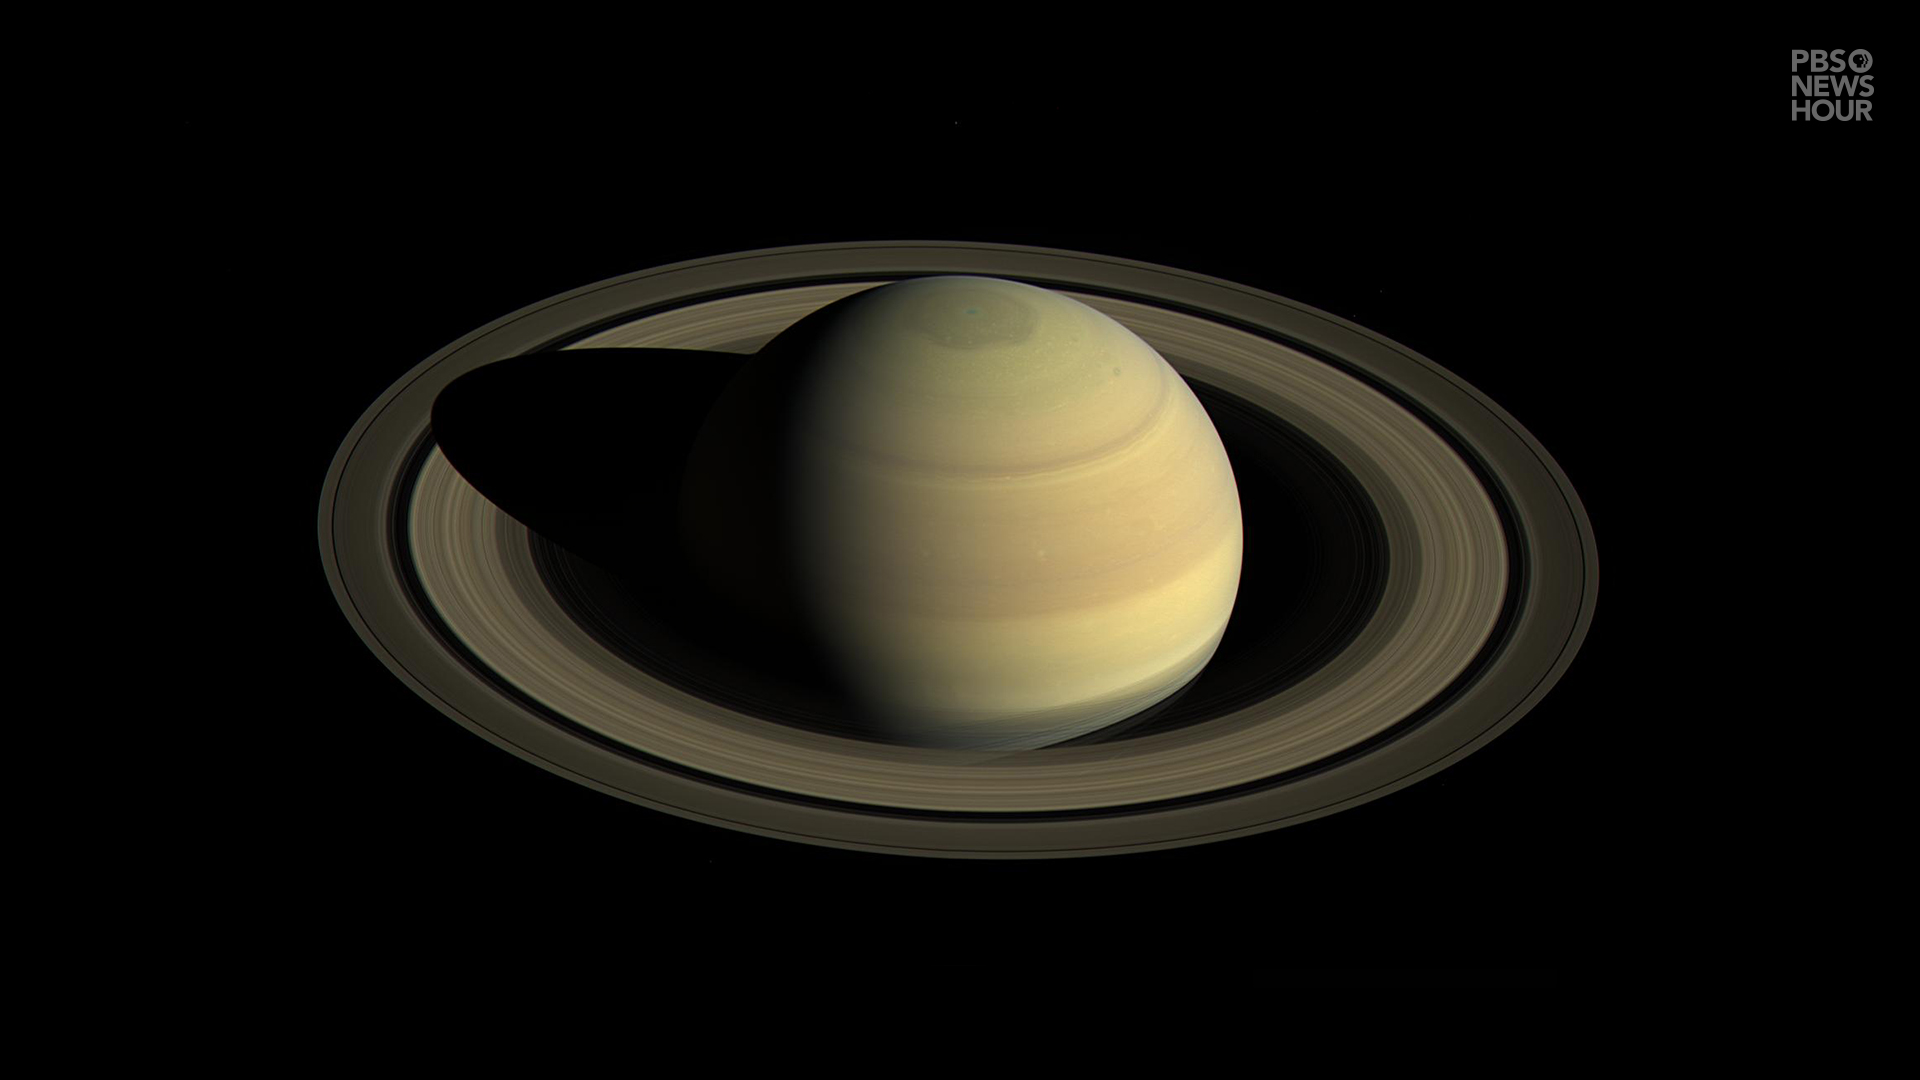 Let Cassini live forever with these desktop and smartphone wallpaper